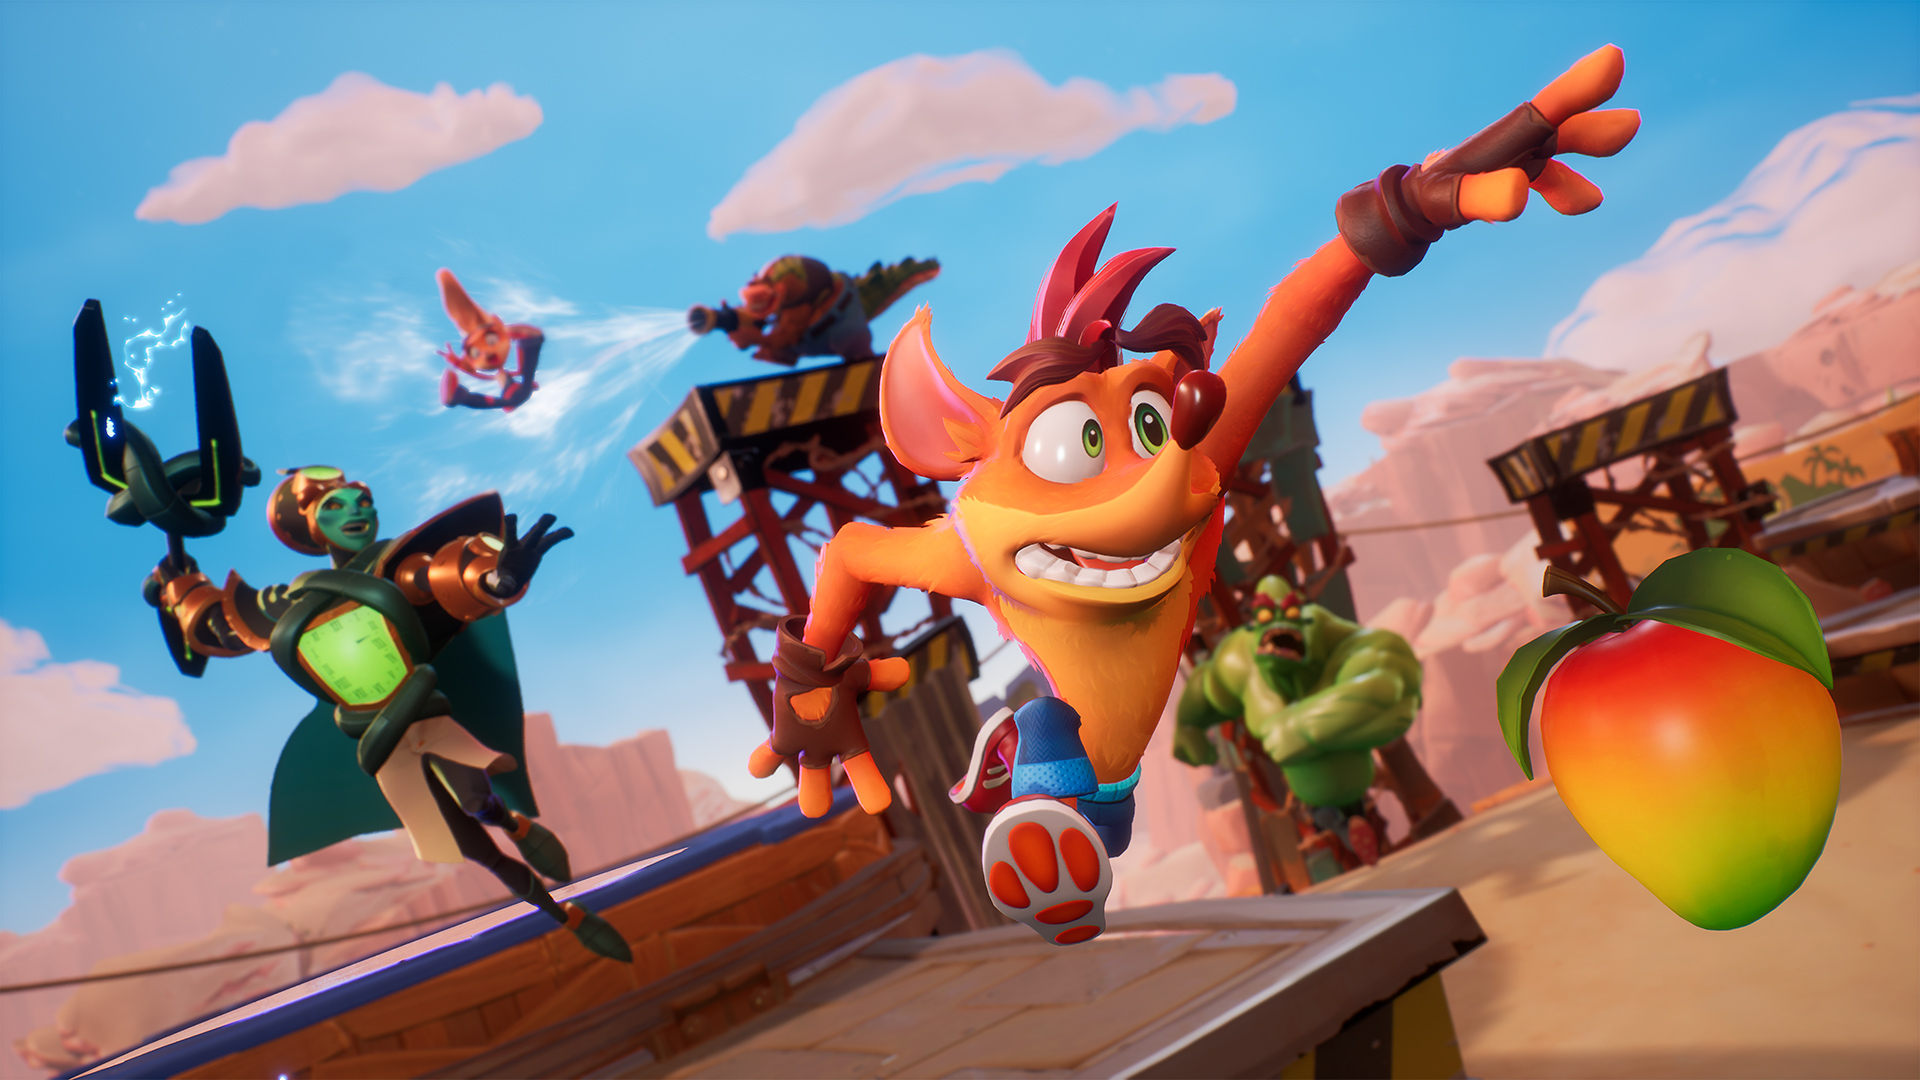 Crash Bandicoot 4' doesn't add anything to the platforming genre